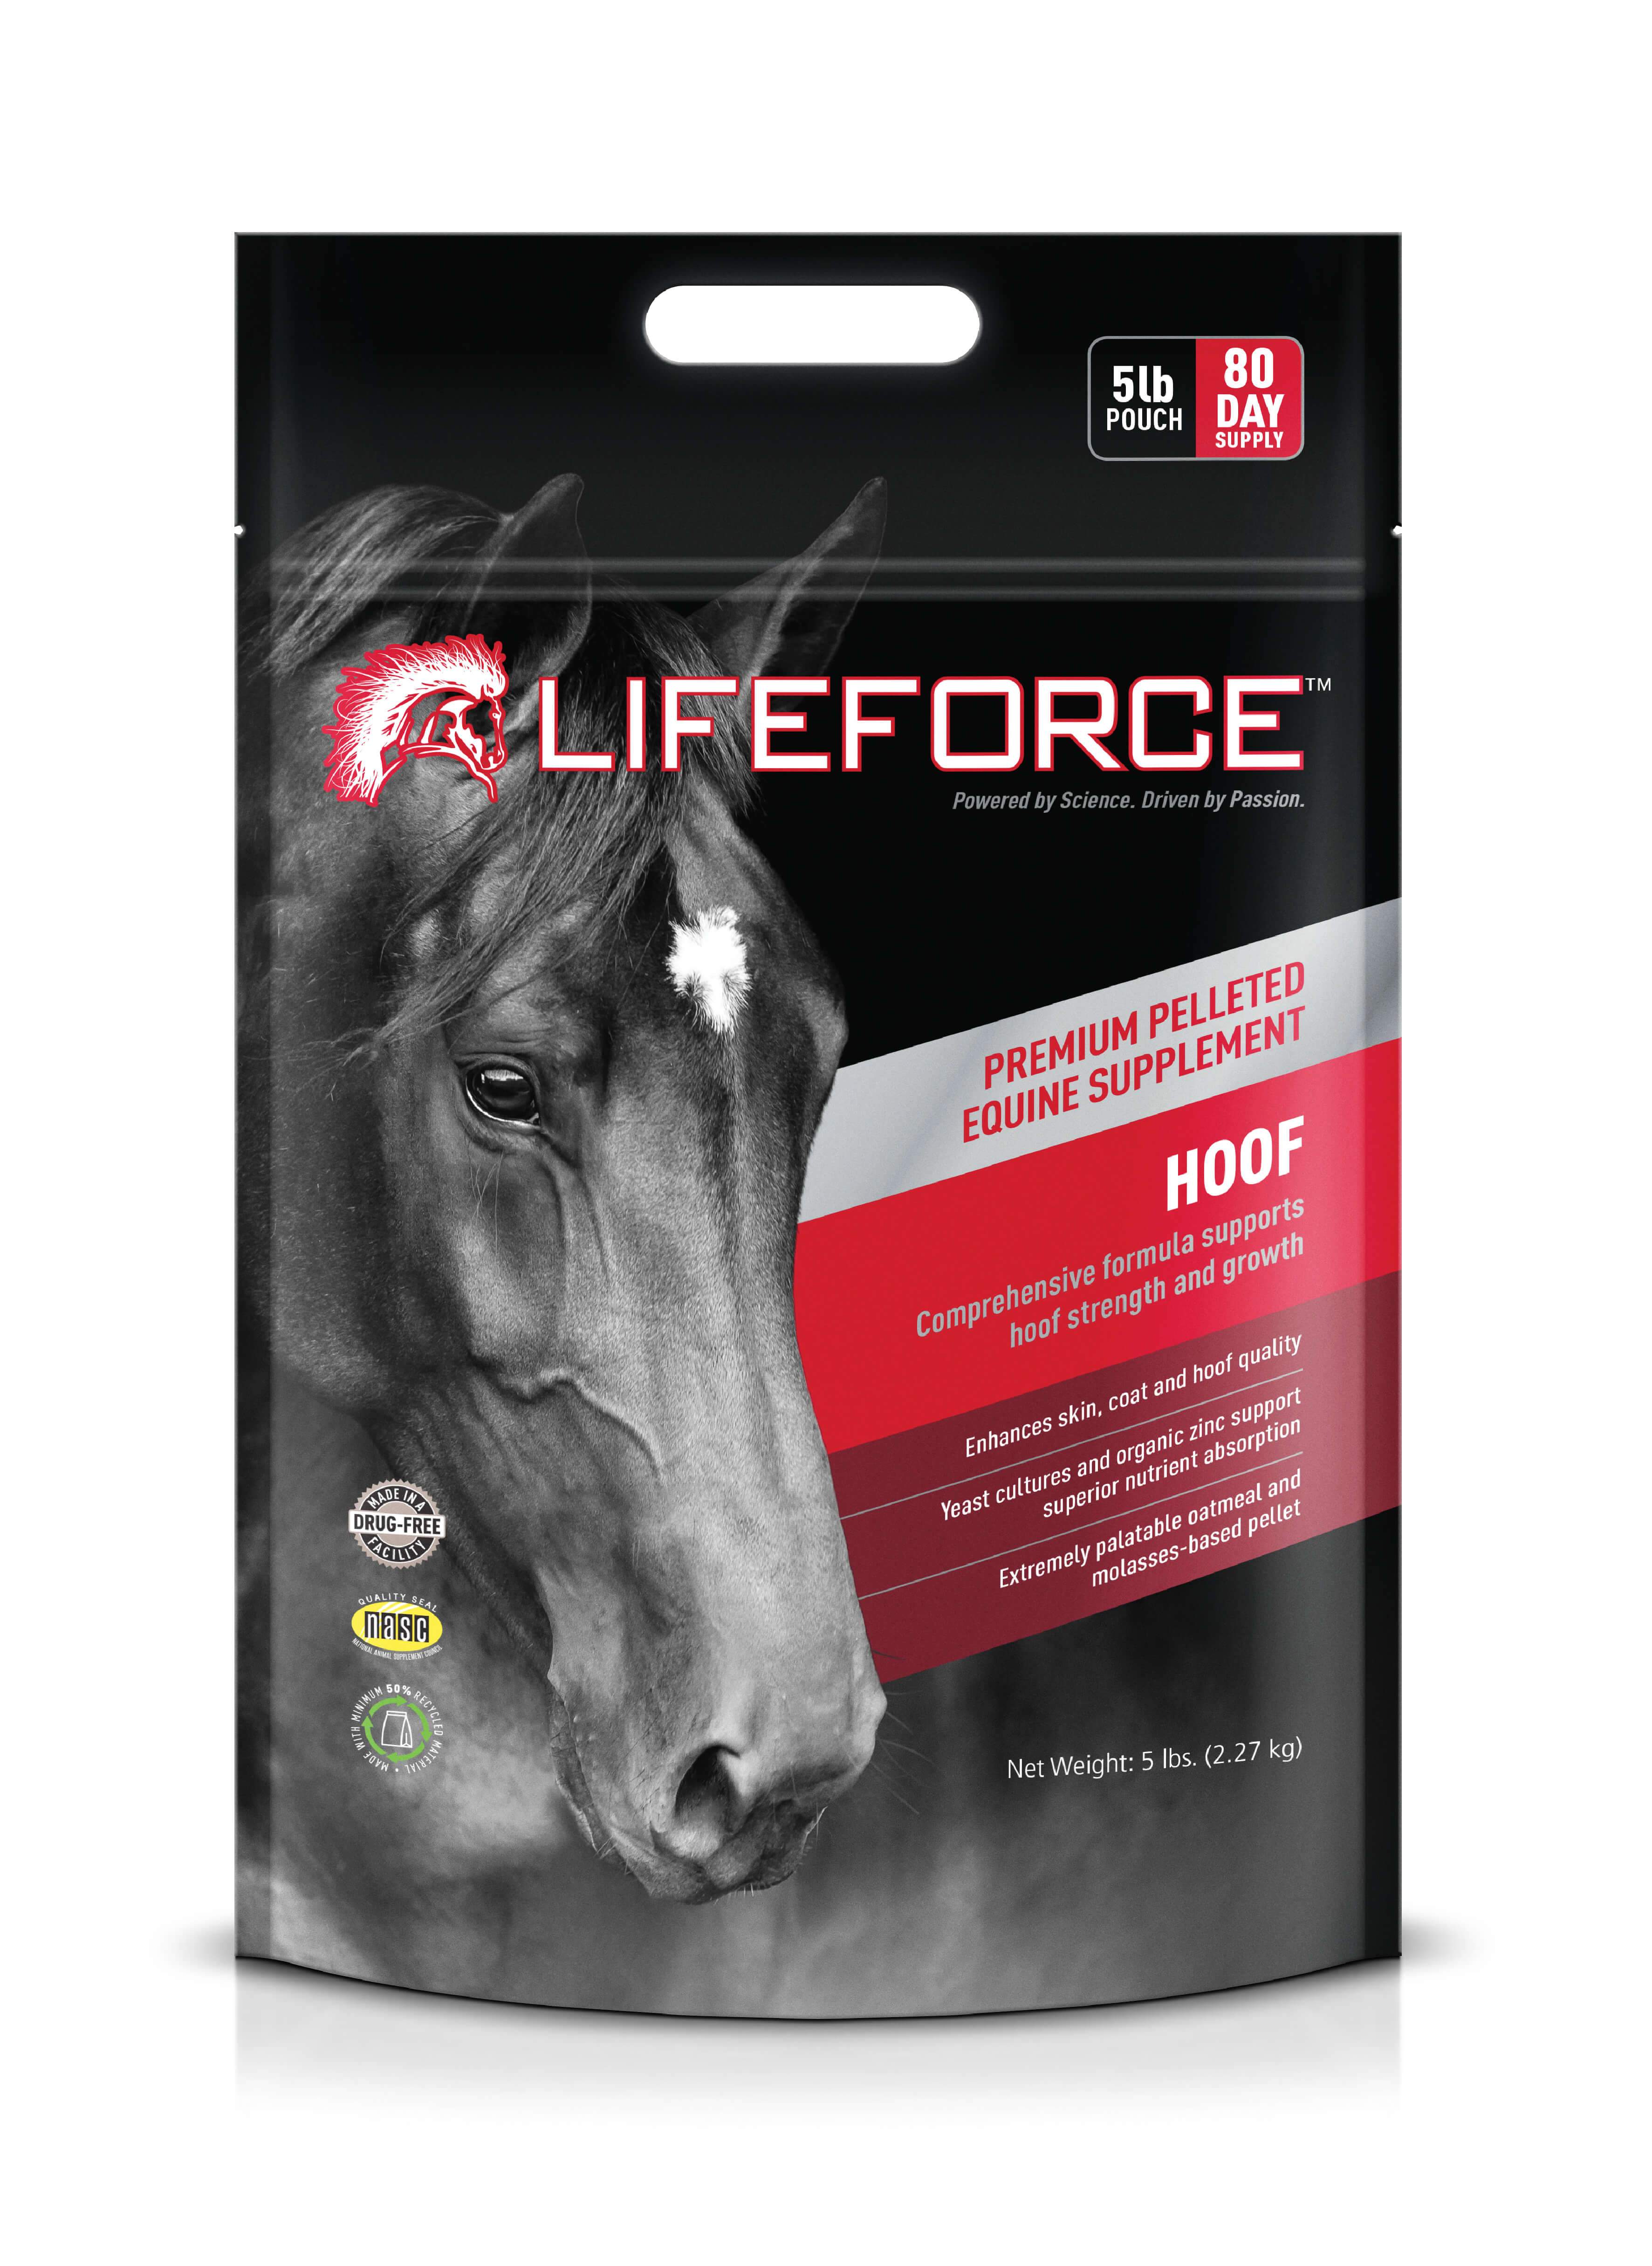 Lifeforce Hoof product pouch image